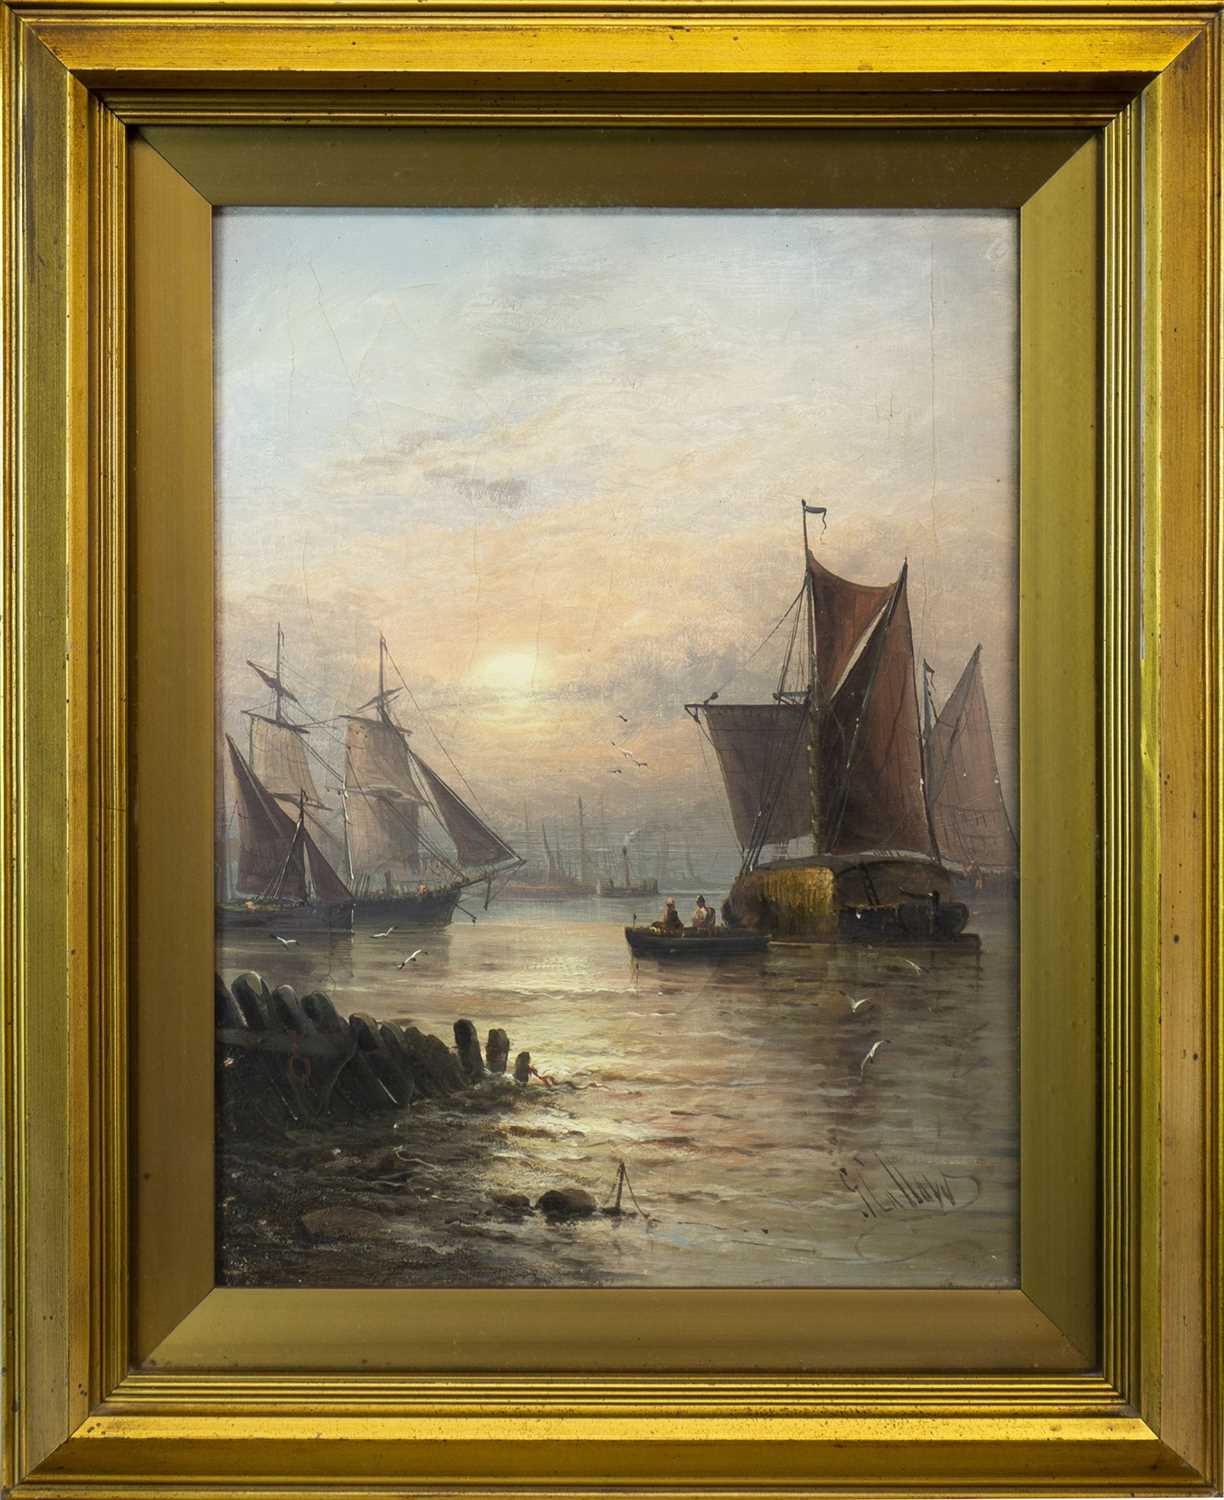 Lot 608 - BOATS ON CALM WATERS, BY G CALLOW